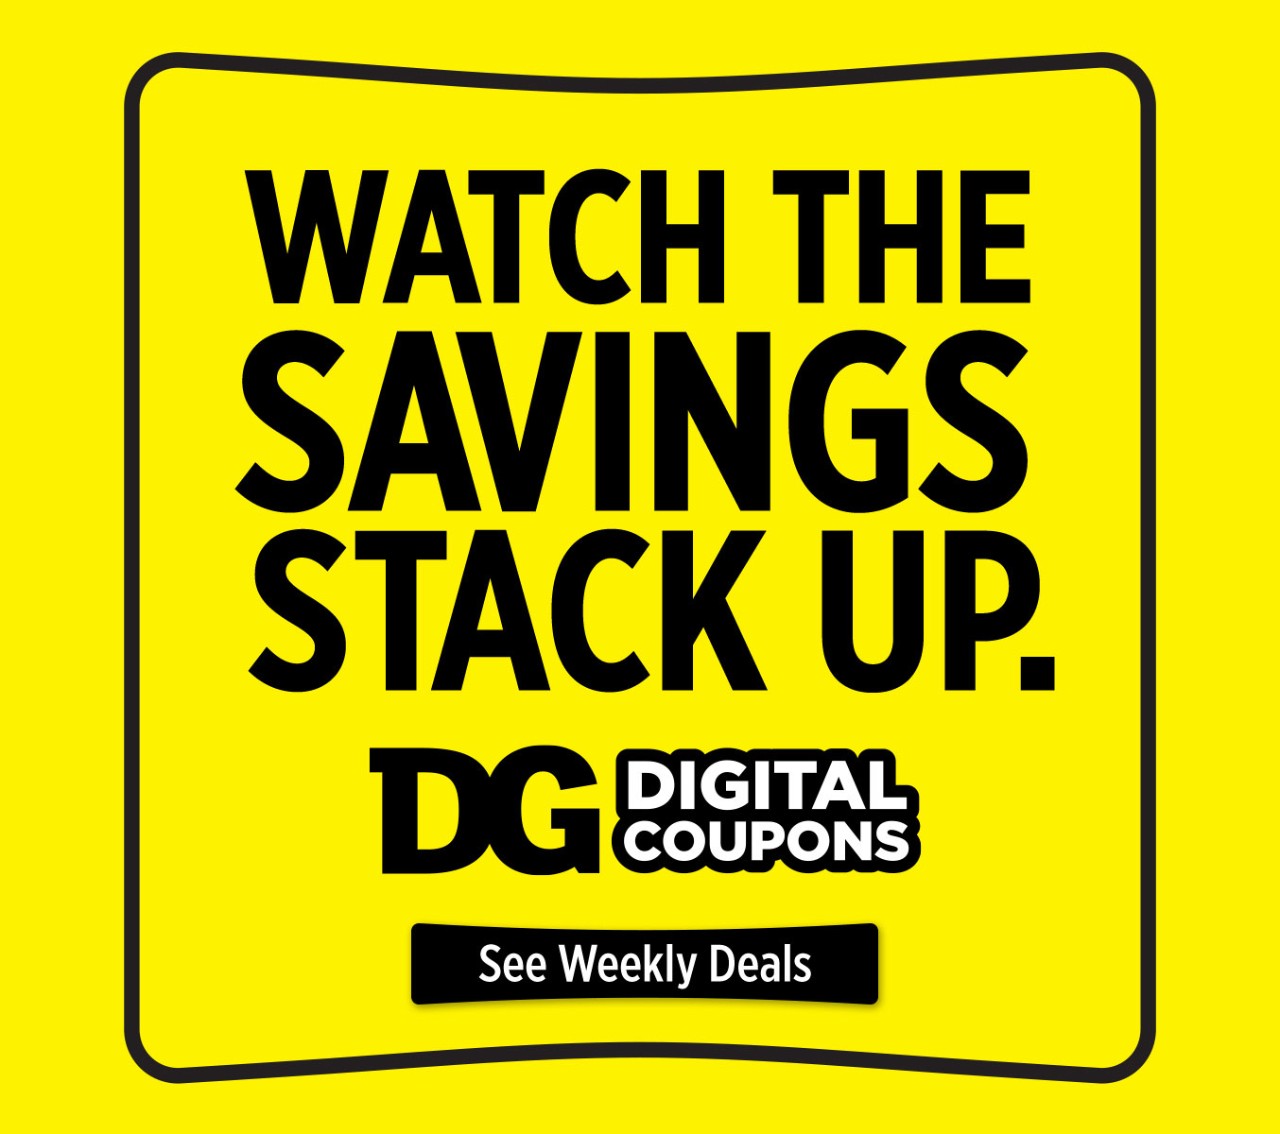 Watch the Savings Stack Up with DG Digital Coupons